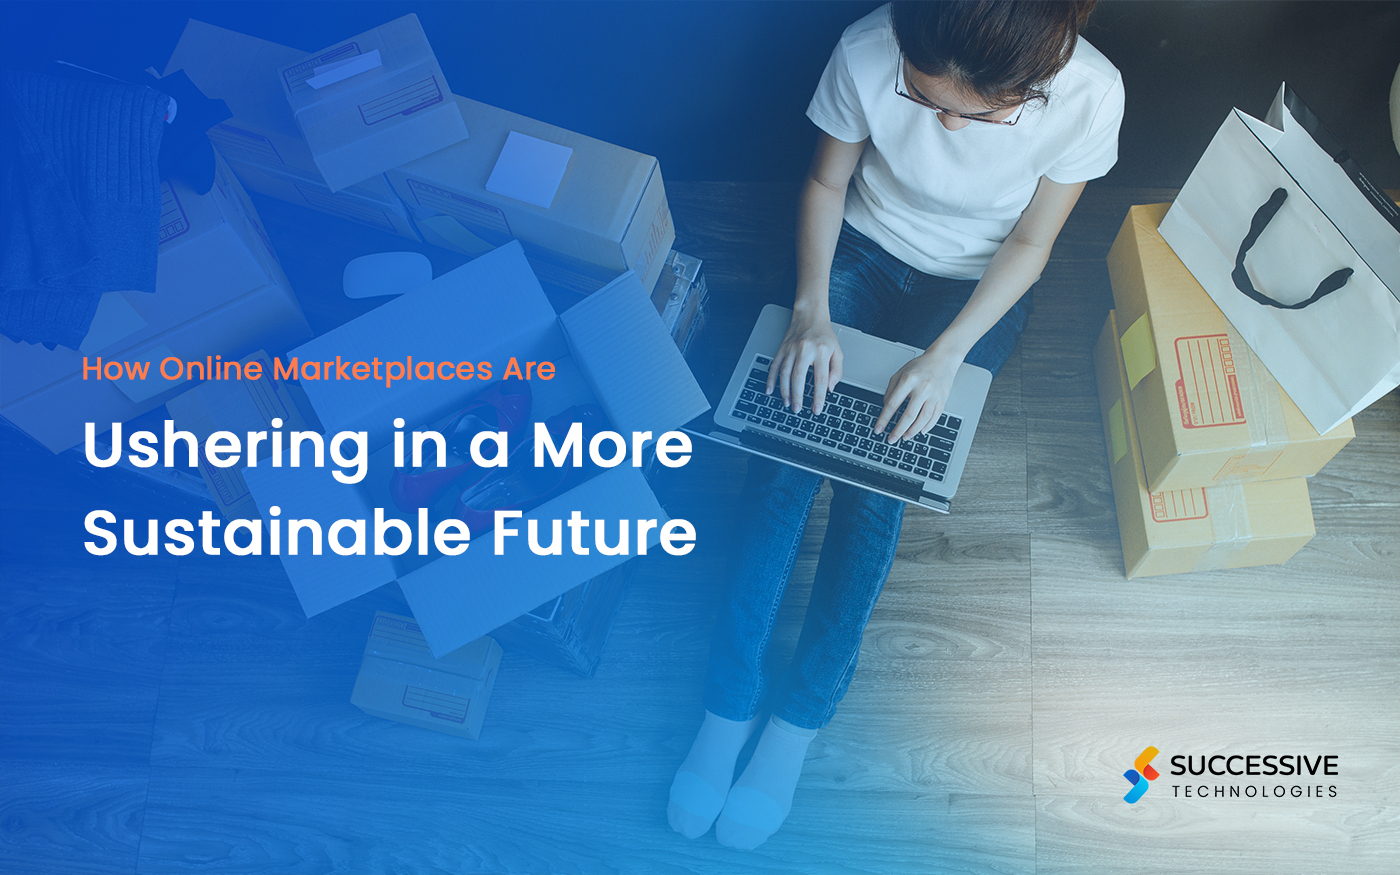 How Online Marketplaces Are Ushering in a More Sustainable Future